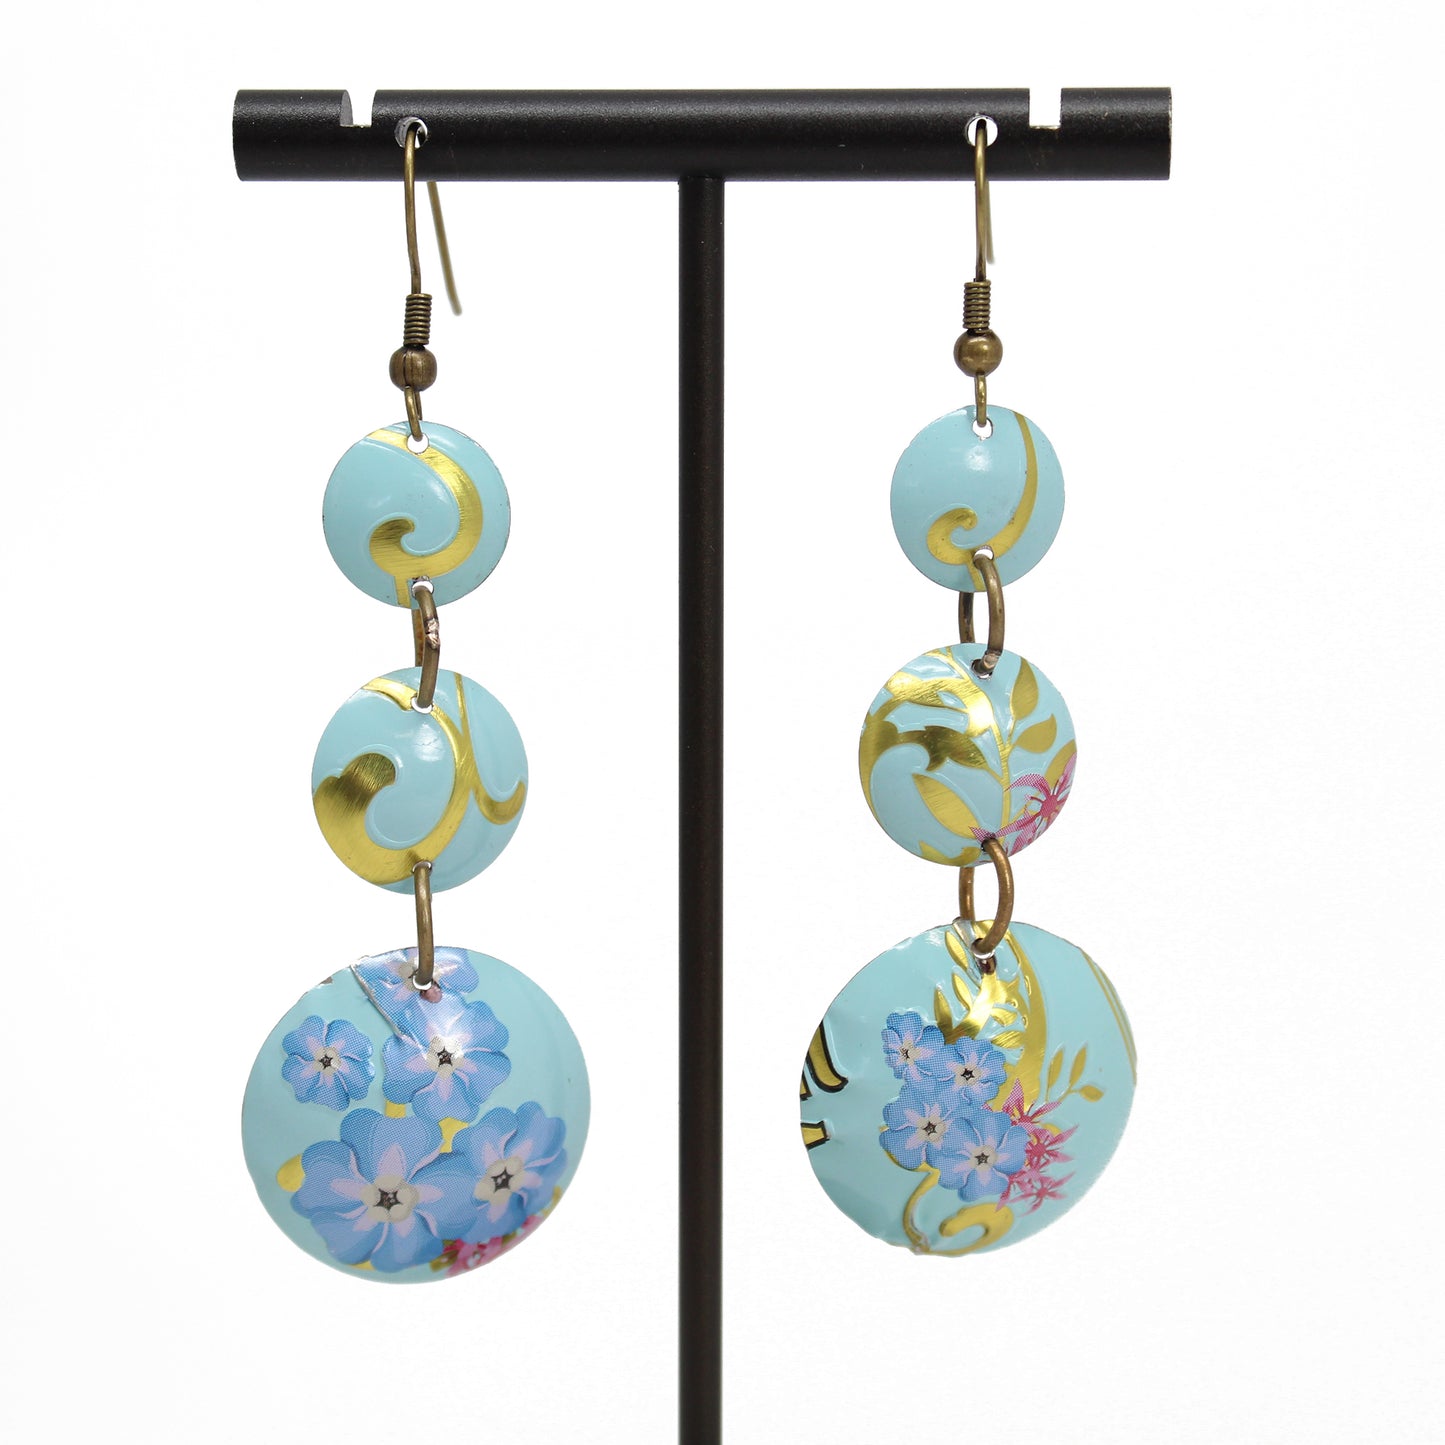 Blue and Gold Recycled Vintage Tin Earrings